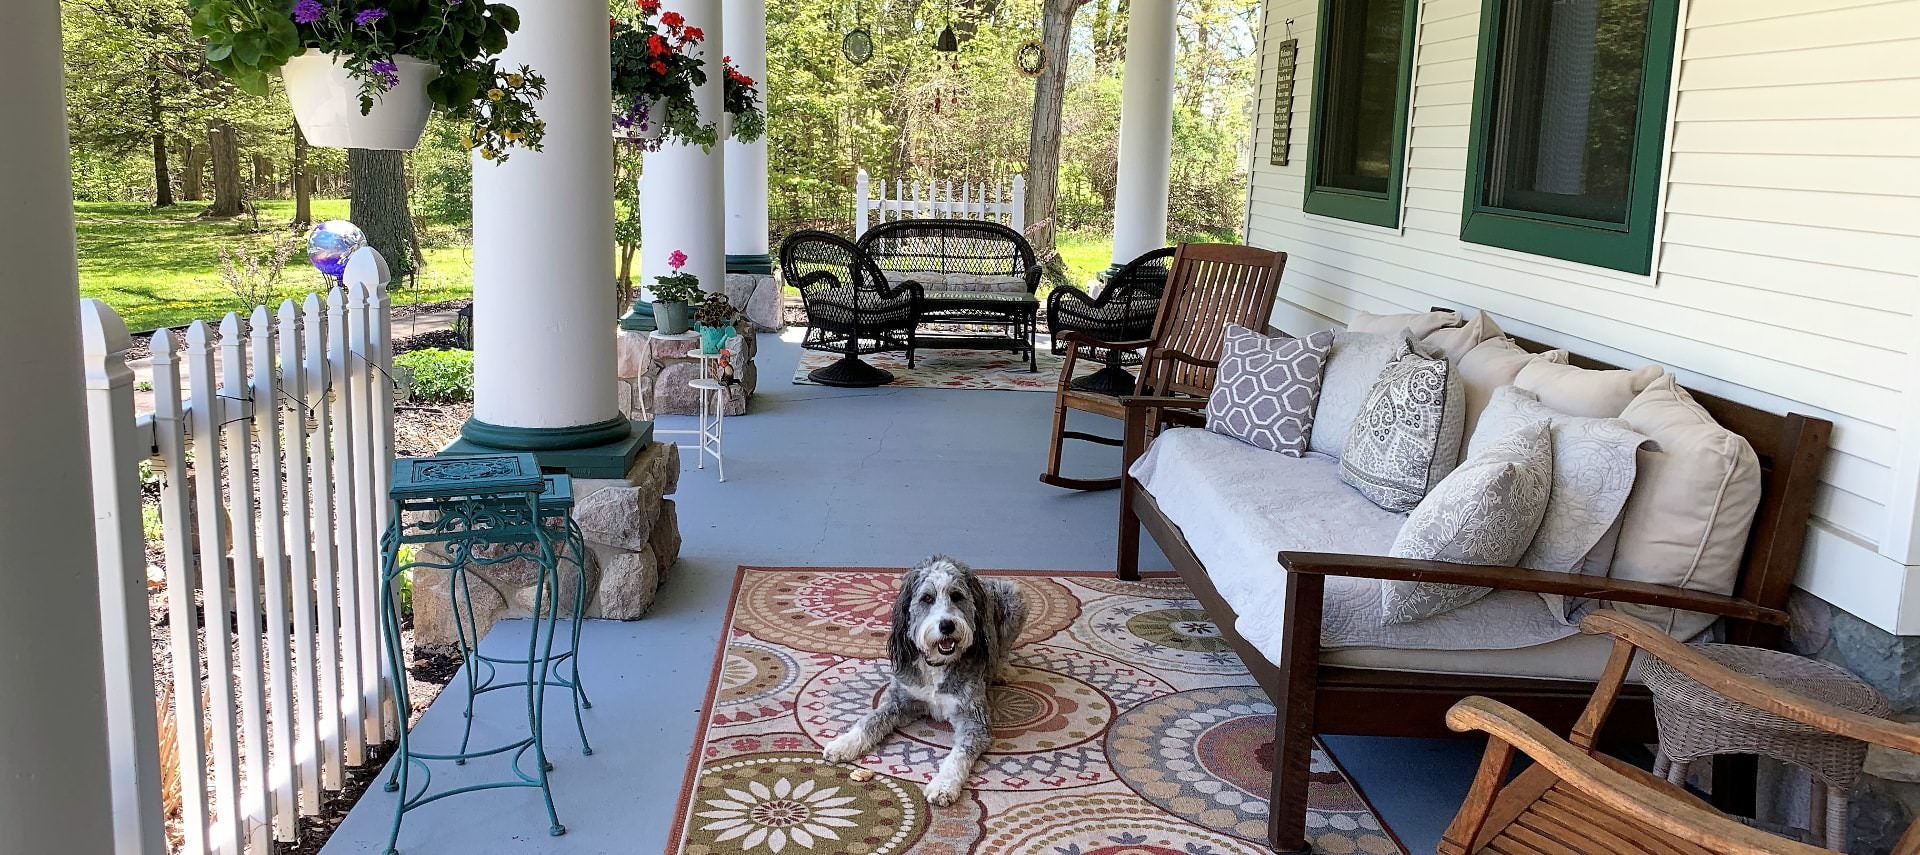 Front porch with dark wicker and dark wooden patio furniture and rocking chairs, area rugs, and gray and white dog laying on a rug